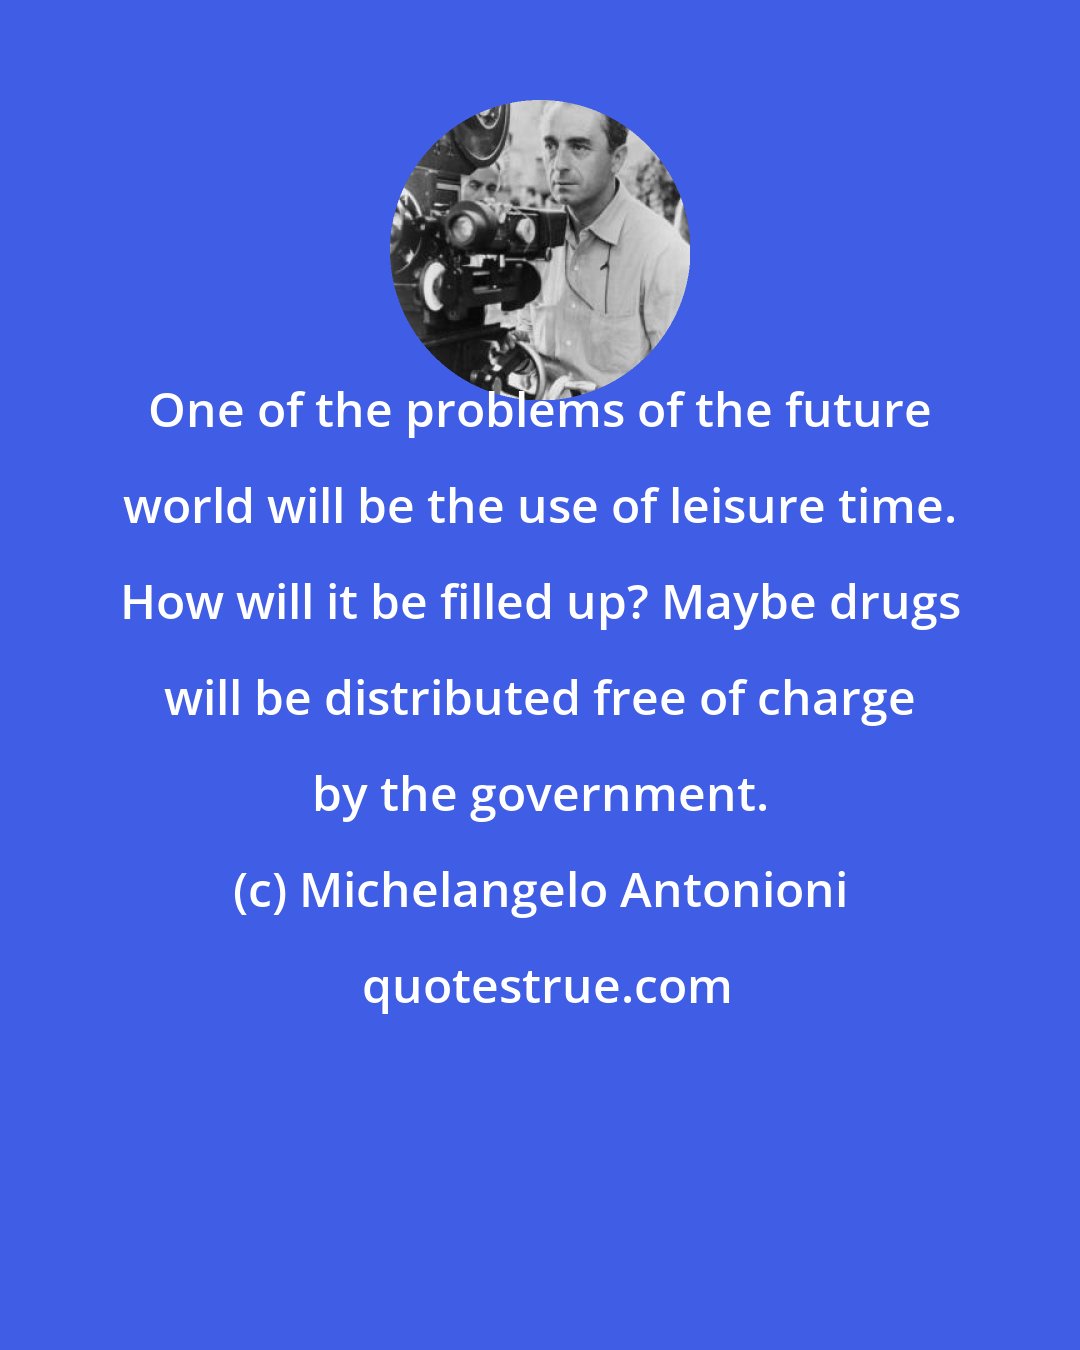 Michelangelo Antonioni: One of the problems of the future world will be the use of leisure time. How will it be filled up? Maybe drugs will be distributed free of charge by the government.